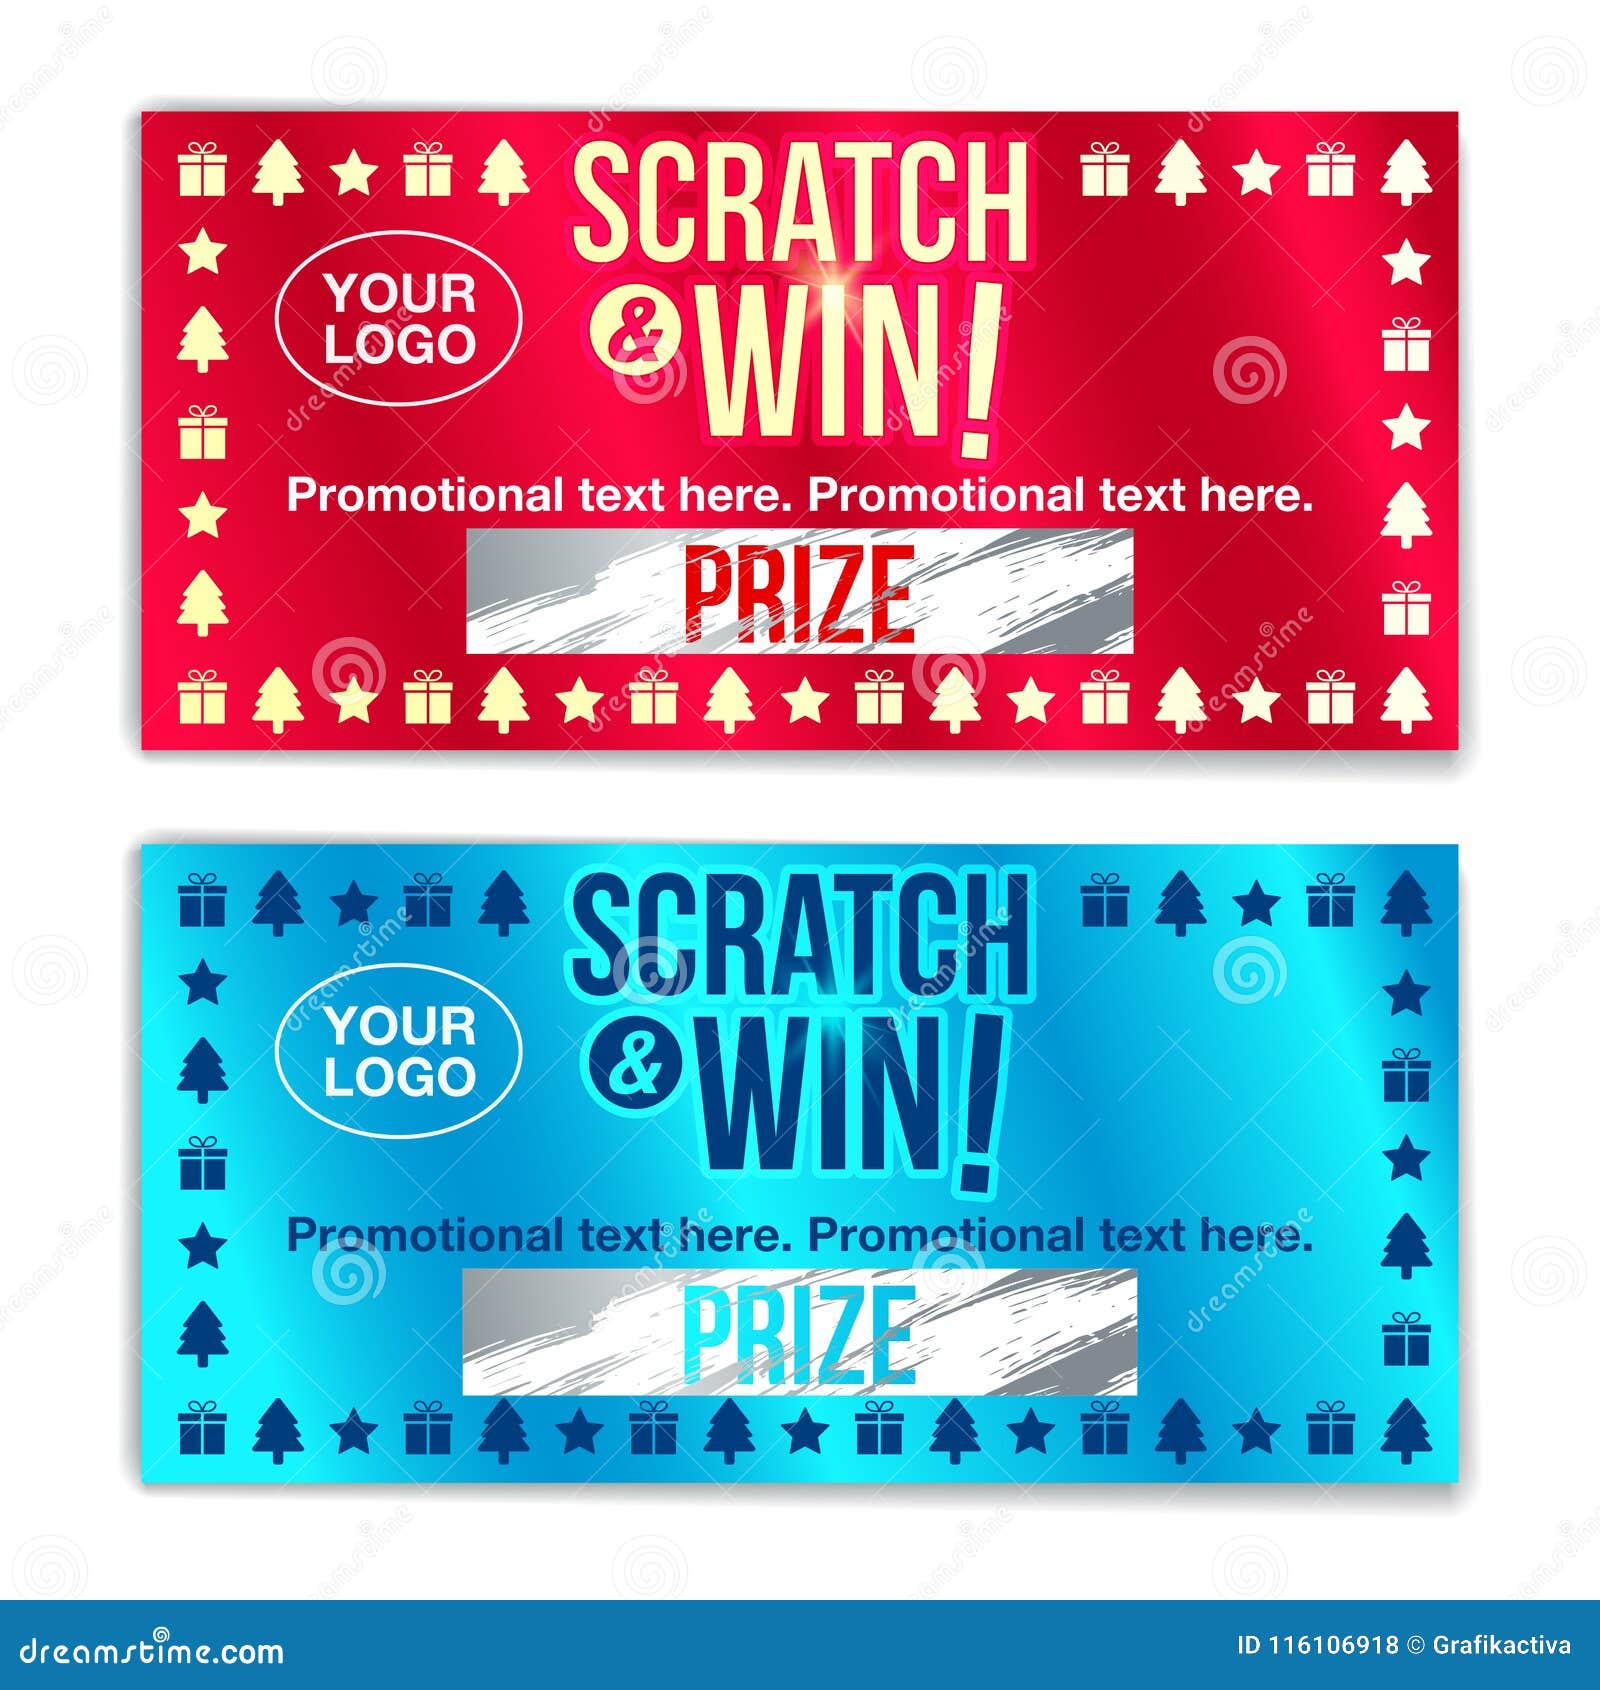 scratch card game and win. with effect from scratch marks. with